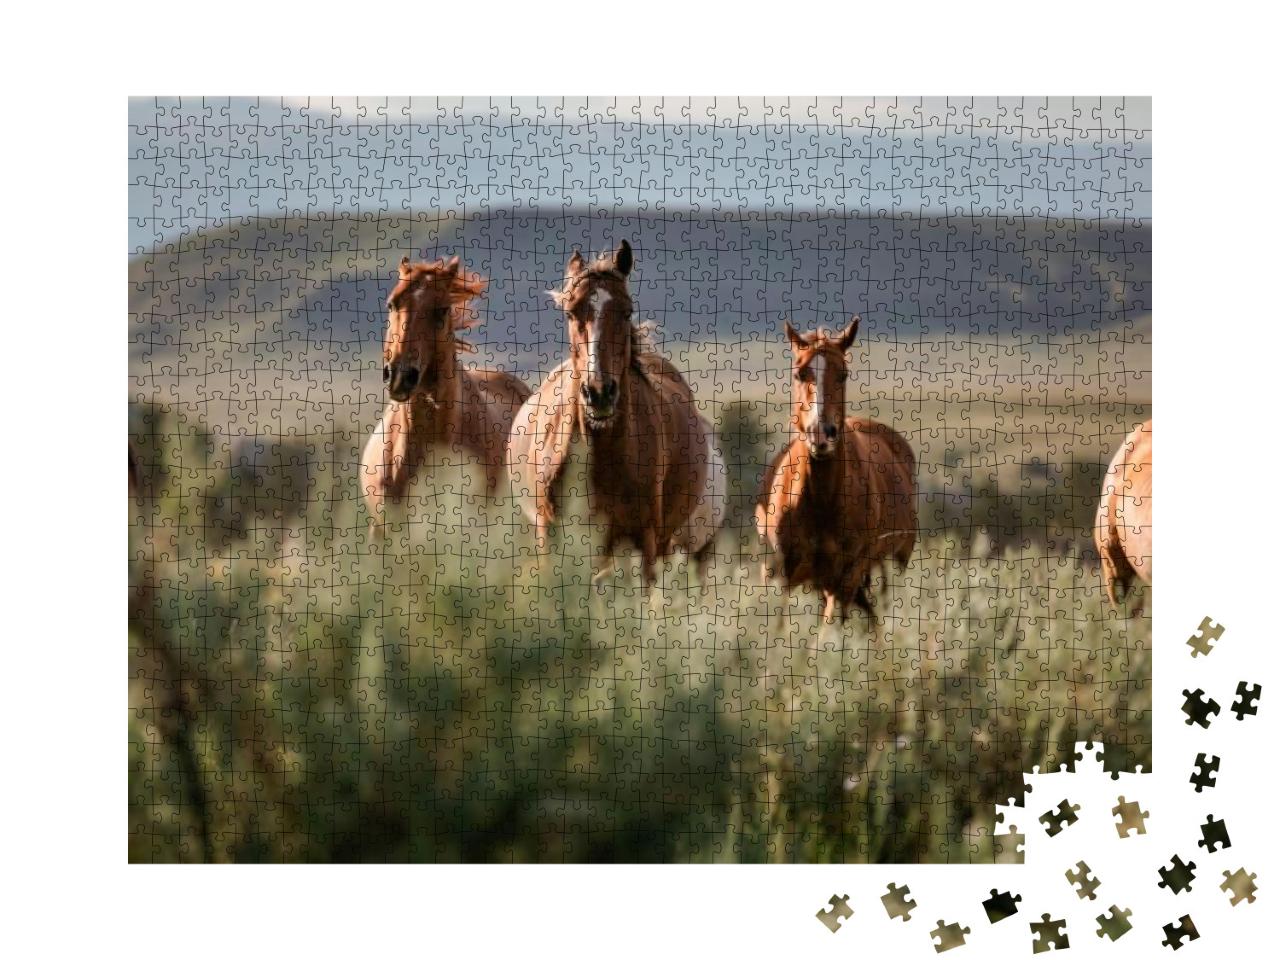 Beautiful Herd of American Quarter Horse Ranch Horses in... Jigsaw Puzzle with 1000 pieces